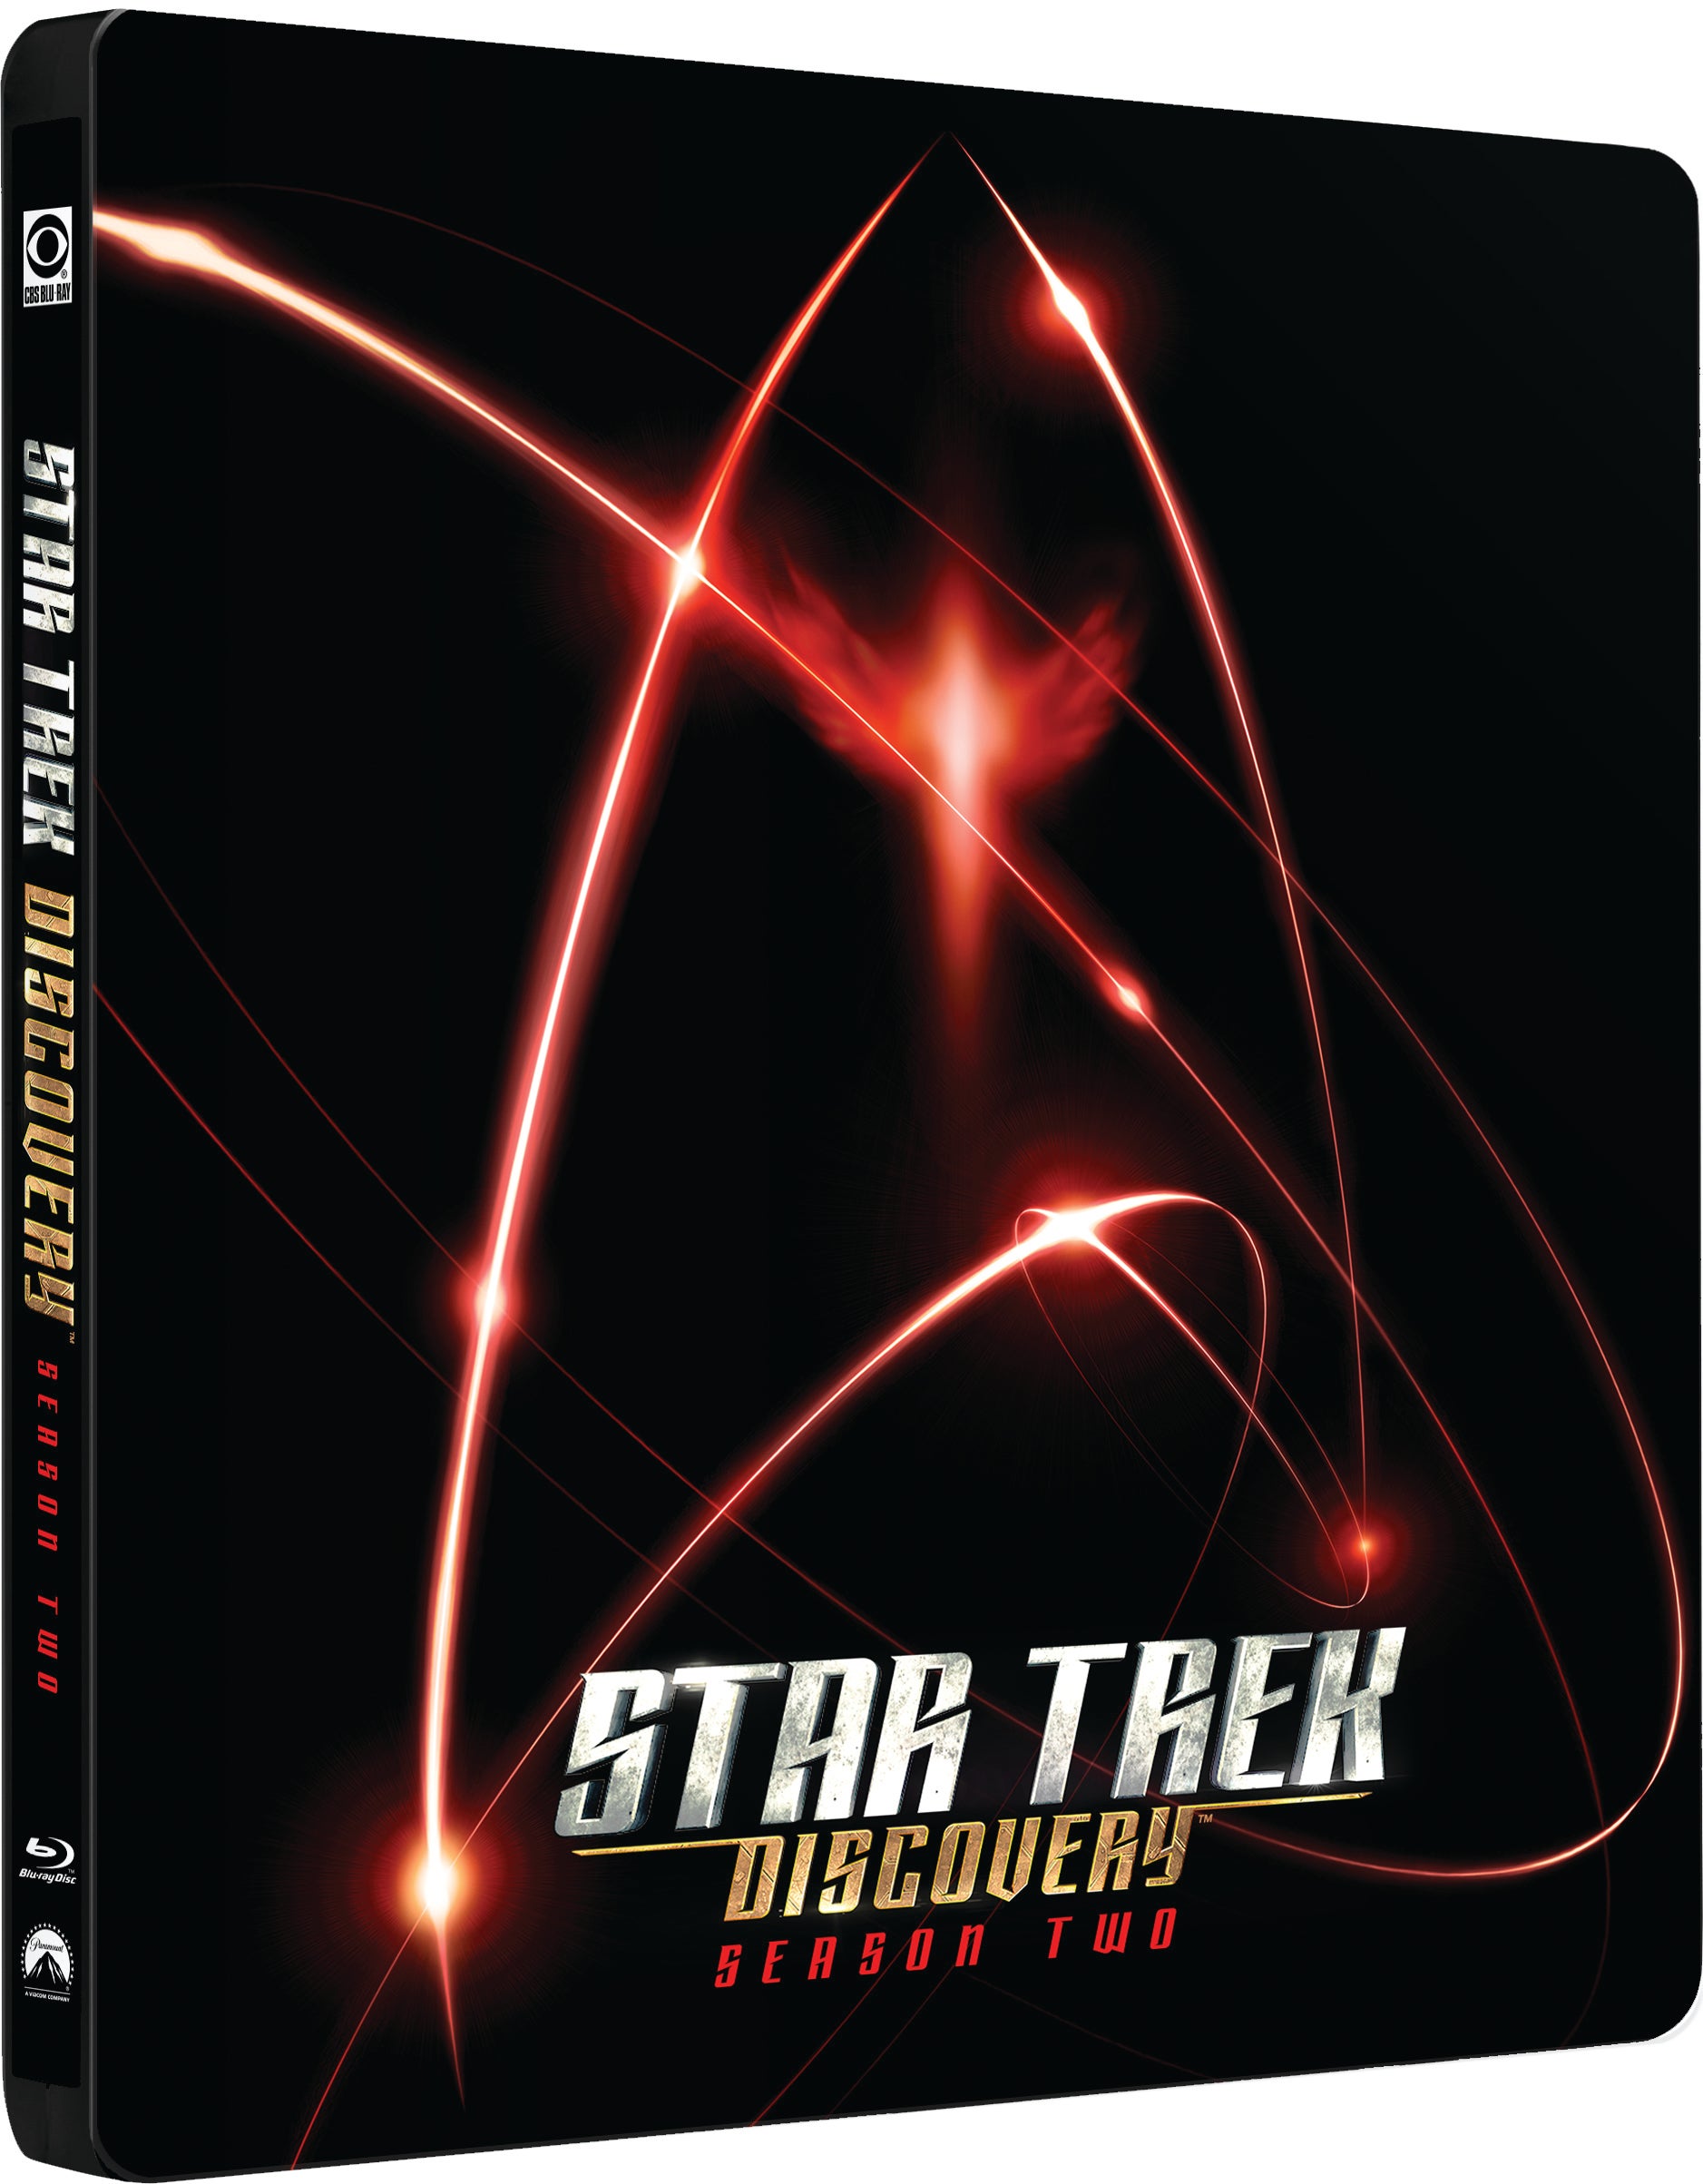 Discovery' Season Two Blu-ray Out in November | Star Trek